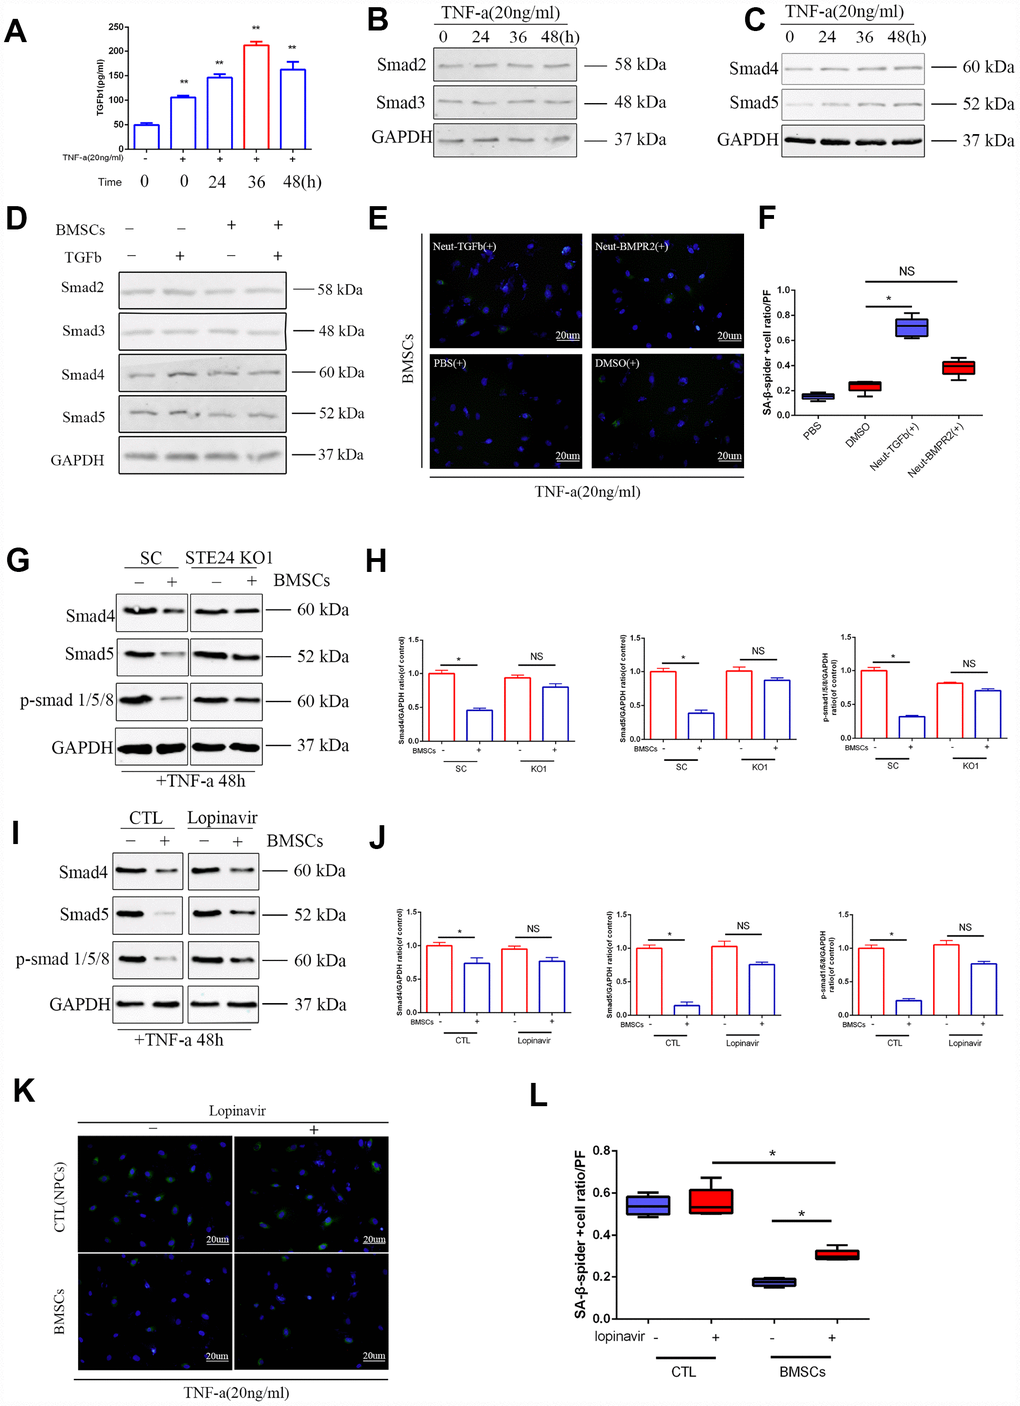 Effects of ZMPSTE24 on senescence associated TGFβ/Smad signaling pathway. (A) Elisa result of TGFβ1 in senescent NPCs culture supernatant. (B–C) Protein expressions of Smad2, Smad3, Smad4 and Smad5 under TNF-a inducing were visualized by western blot and quantified by Image J. n=3. (D) Protein expression of Smad2, Smad3, Smad4 and Smad5 were visualized by western blot and quantified by Image J. n=3. (E–F) Spider-β-gal staining of NP cells between different neutralizing groups(Neut-TGFb and Neut-BMPR2). Combined with DAPI staining for nuclei. n=5, Scale bar, 20um. (G–H) Protein expression of Smad4, Smad5 and p-Smad1/5/8 in NP cells with stable scramble vector (SC) or knockout of ZMPSTE24 were visualized by western blot and quantified by Image J. n=3. (I–J) Protein expression of Smad4, Smad5 and p-Smad1/5/8 in NP cells with or without BMSCs coculture were visualized by western blot and quantified by Image J. n=3. (K–L) Spider-β-gal staining of NP cells between different coculture groups(NPCs or BMSCs) with or without lopinavir. Combined with DAPI staining for nuclei. n=5, Scale bar, 20um. Values represent means±S.D. Significant difference between different groups is indicated as *P 